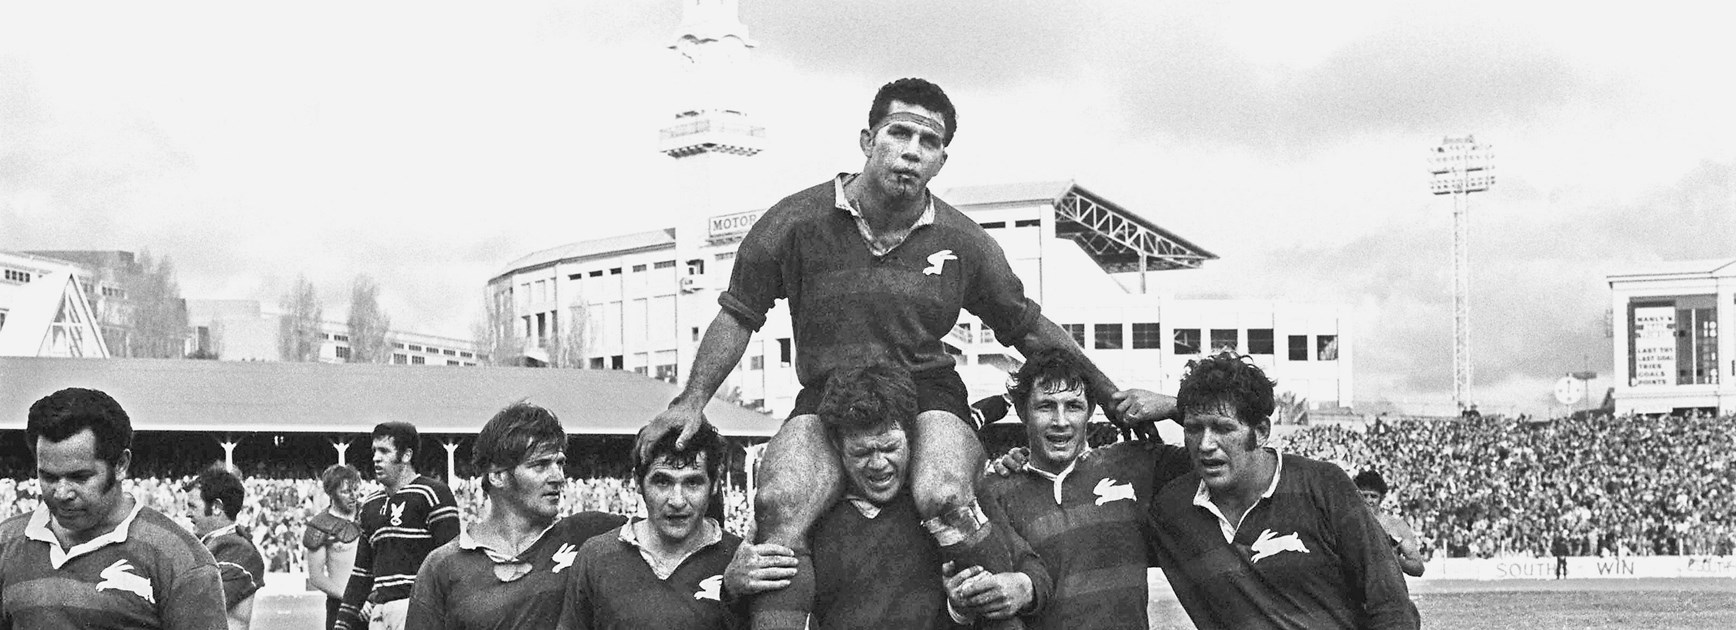 John Sattler is chaired from the SCG by team-mates after leading South Sydney to victory in the 1970 grand final while playing with a shattered jaw for 77 minutes